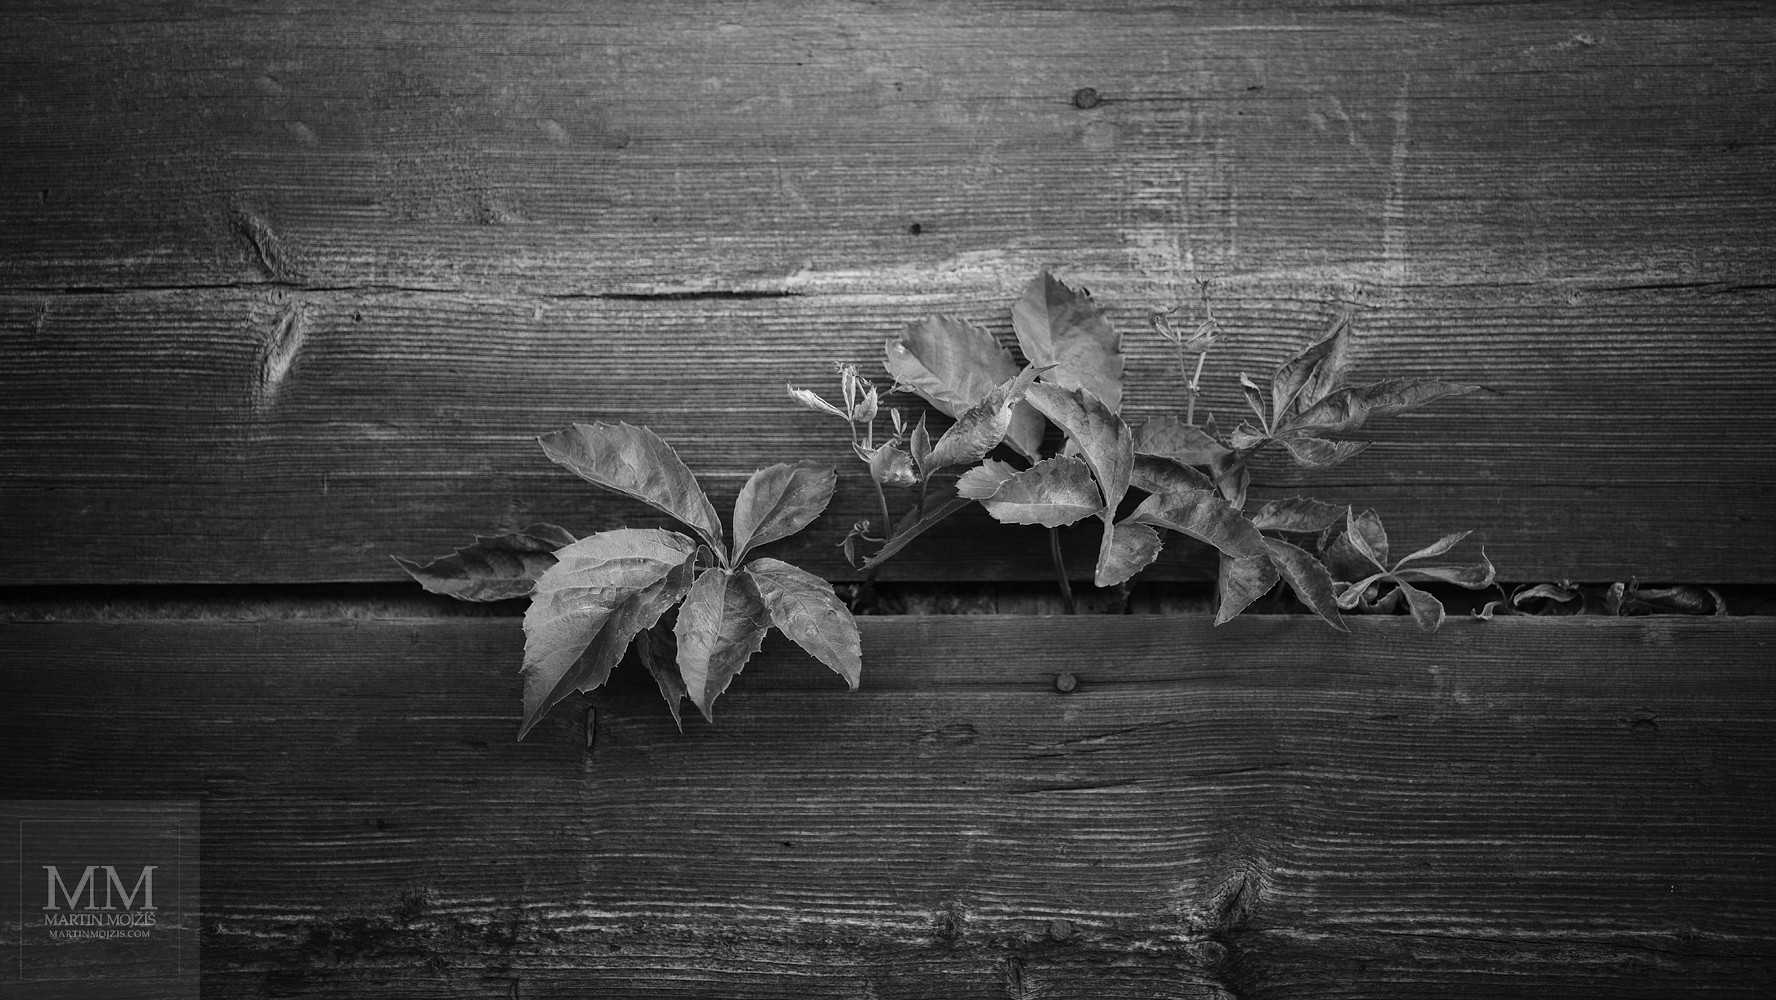 A bush grows through a gap between the planks. Fine art black and white photograph I WILL FIND A WAY, photographed by Martin Mojzis.